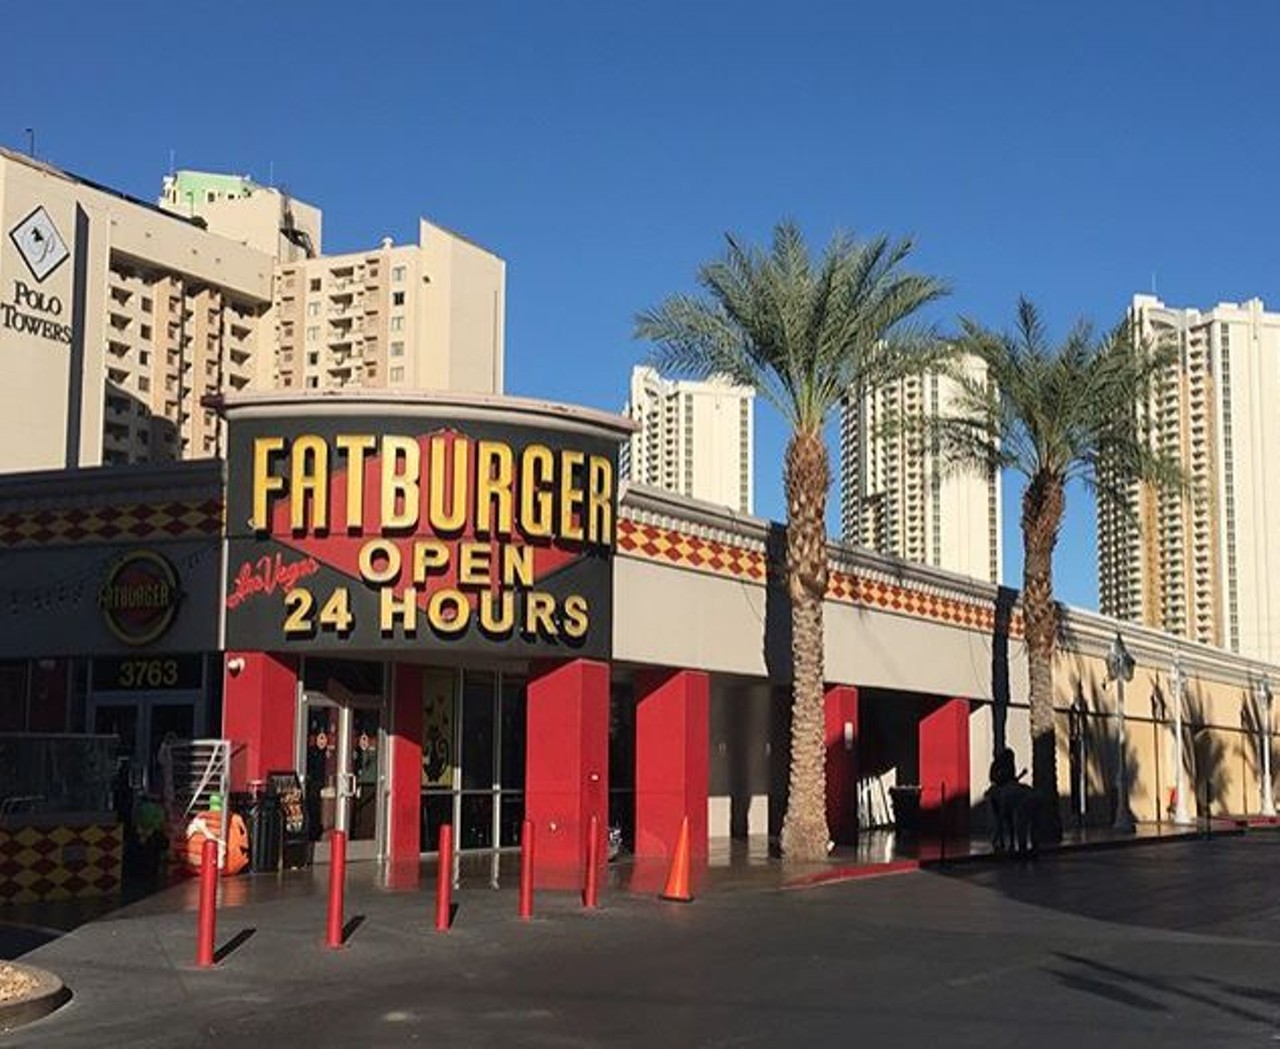 Fatburger
This burger chain goes for the biggest, juiciest burgers that the human jawbone will allow. Now, if only we didn&#146;t have to go to Los Angeles &#151; or Panama, Shanghai, or Cairo &#151; to get one.
Photo via Instagram user @lady_s.hwi